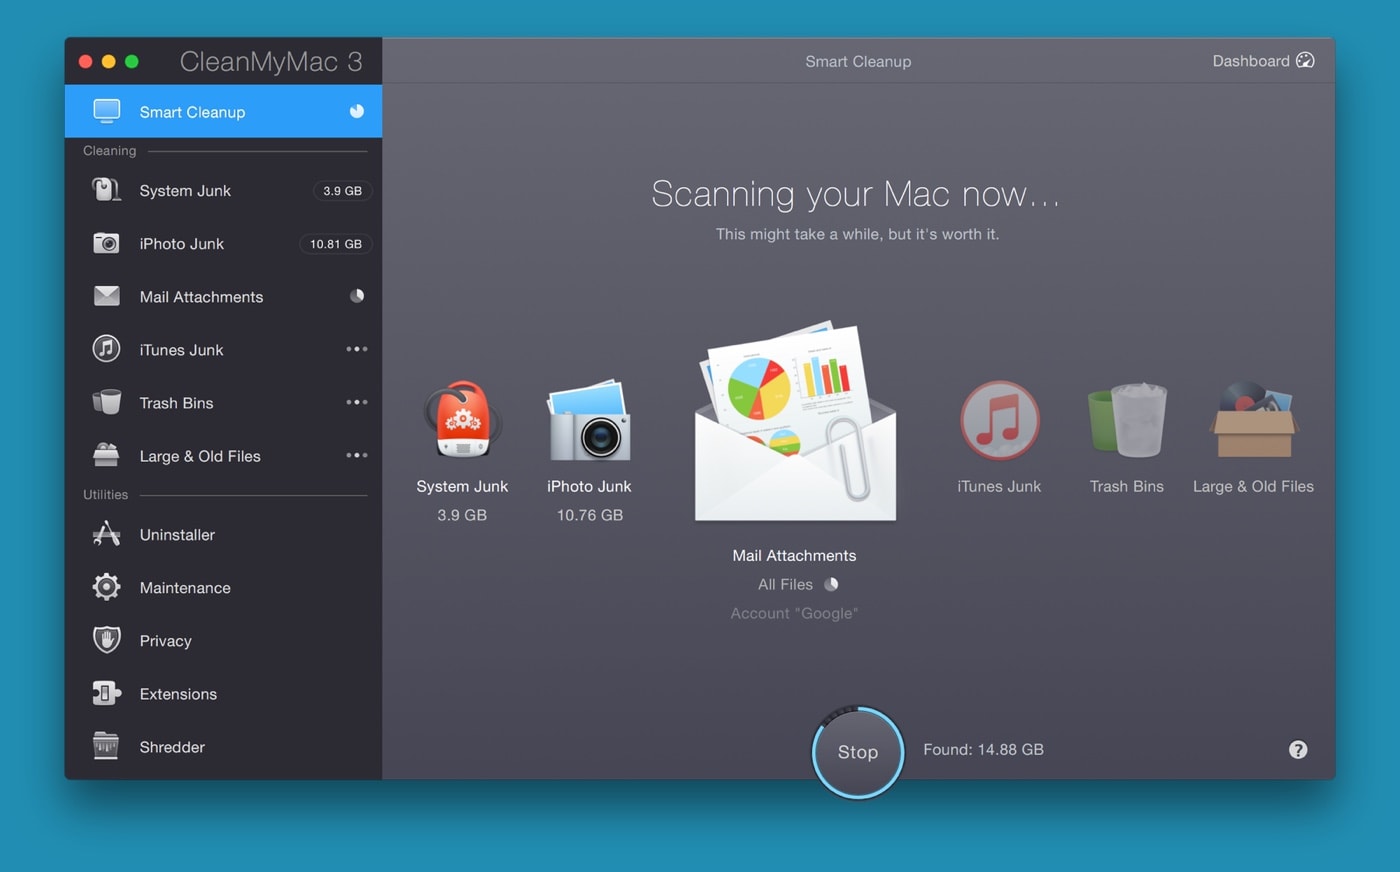 best free mac cleaner app remover